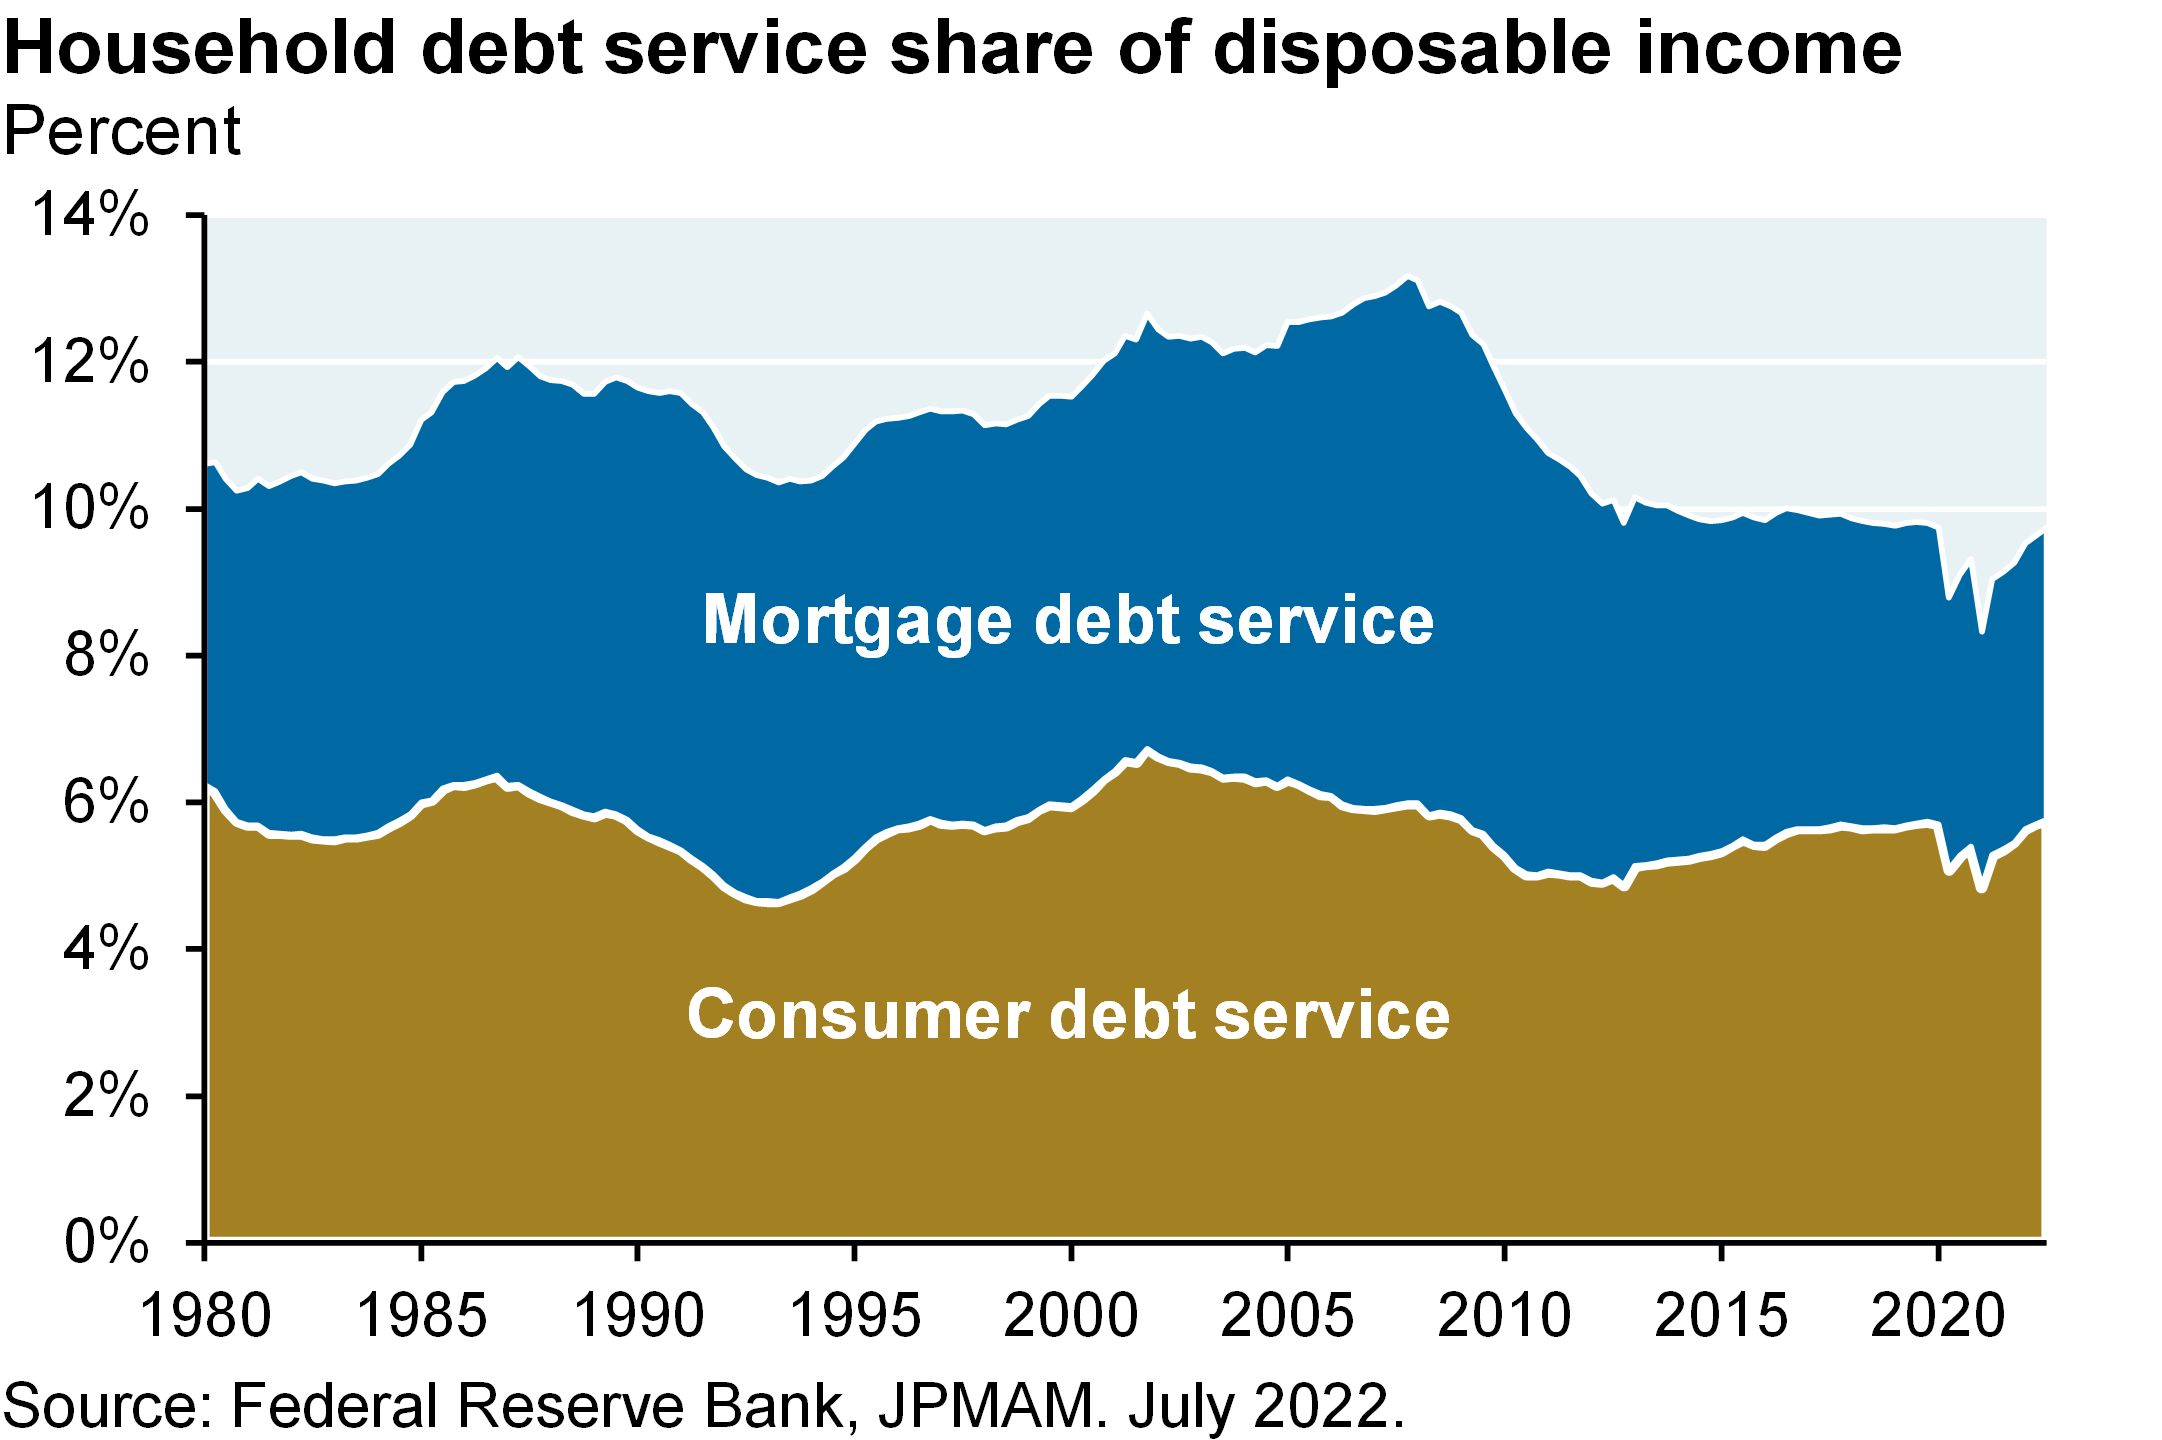 Area chart shows household debt service share of disposable income from 1980 to present. The debt service includes both mortgage and consumer debt. The area chart shows an increase in the share since 2020, but below levels reached in early 2000’s.